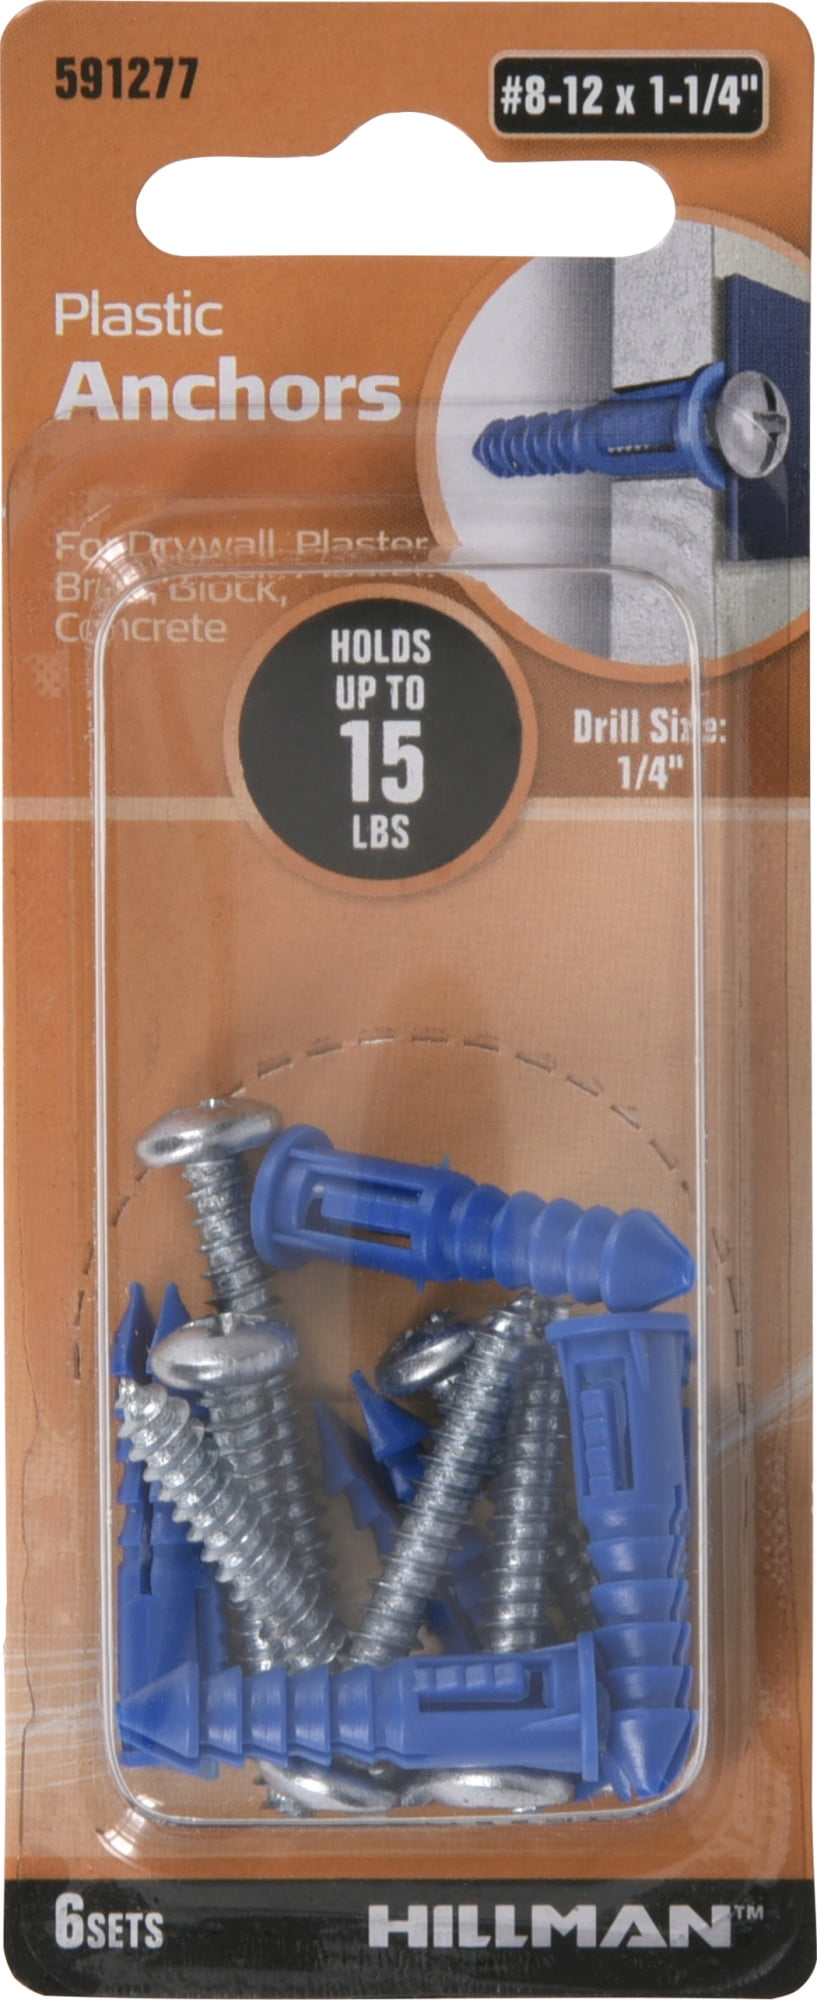 USE #6-8 SCREWS RIBBED PLASTIC ANCHORS W/COLLAR 3/16"X7/8" 40000/PACK FAST SHIP